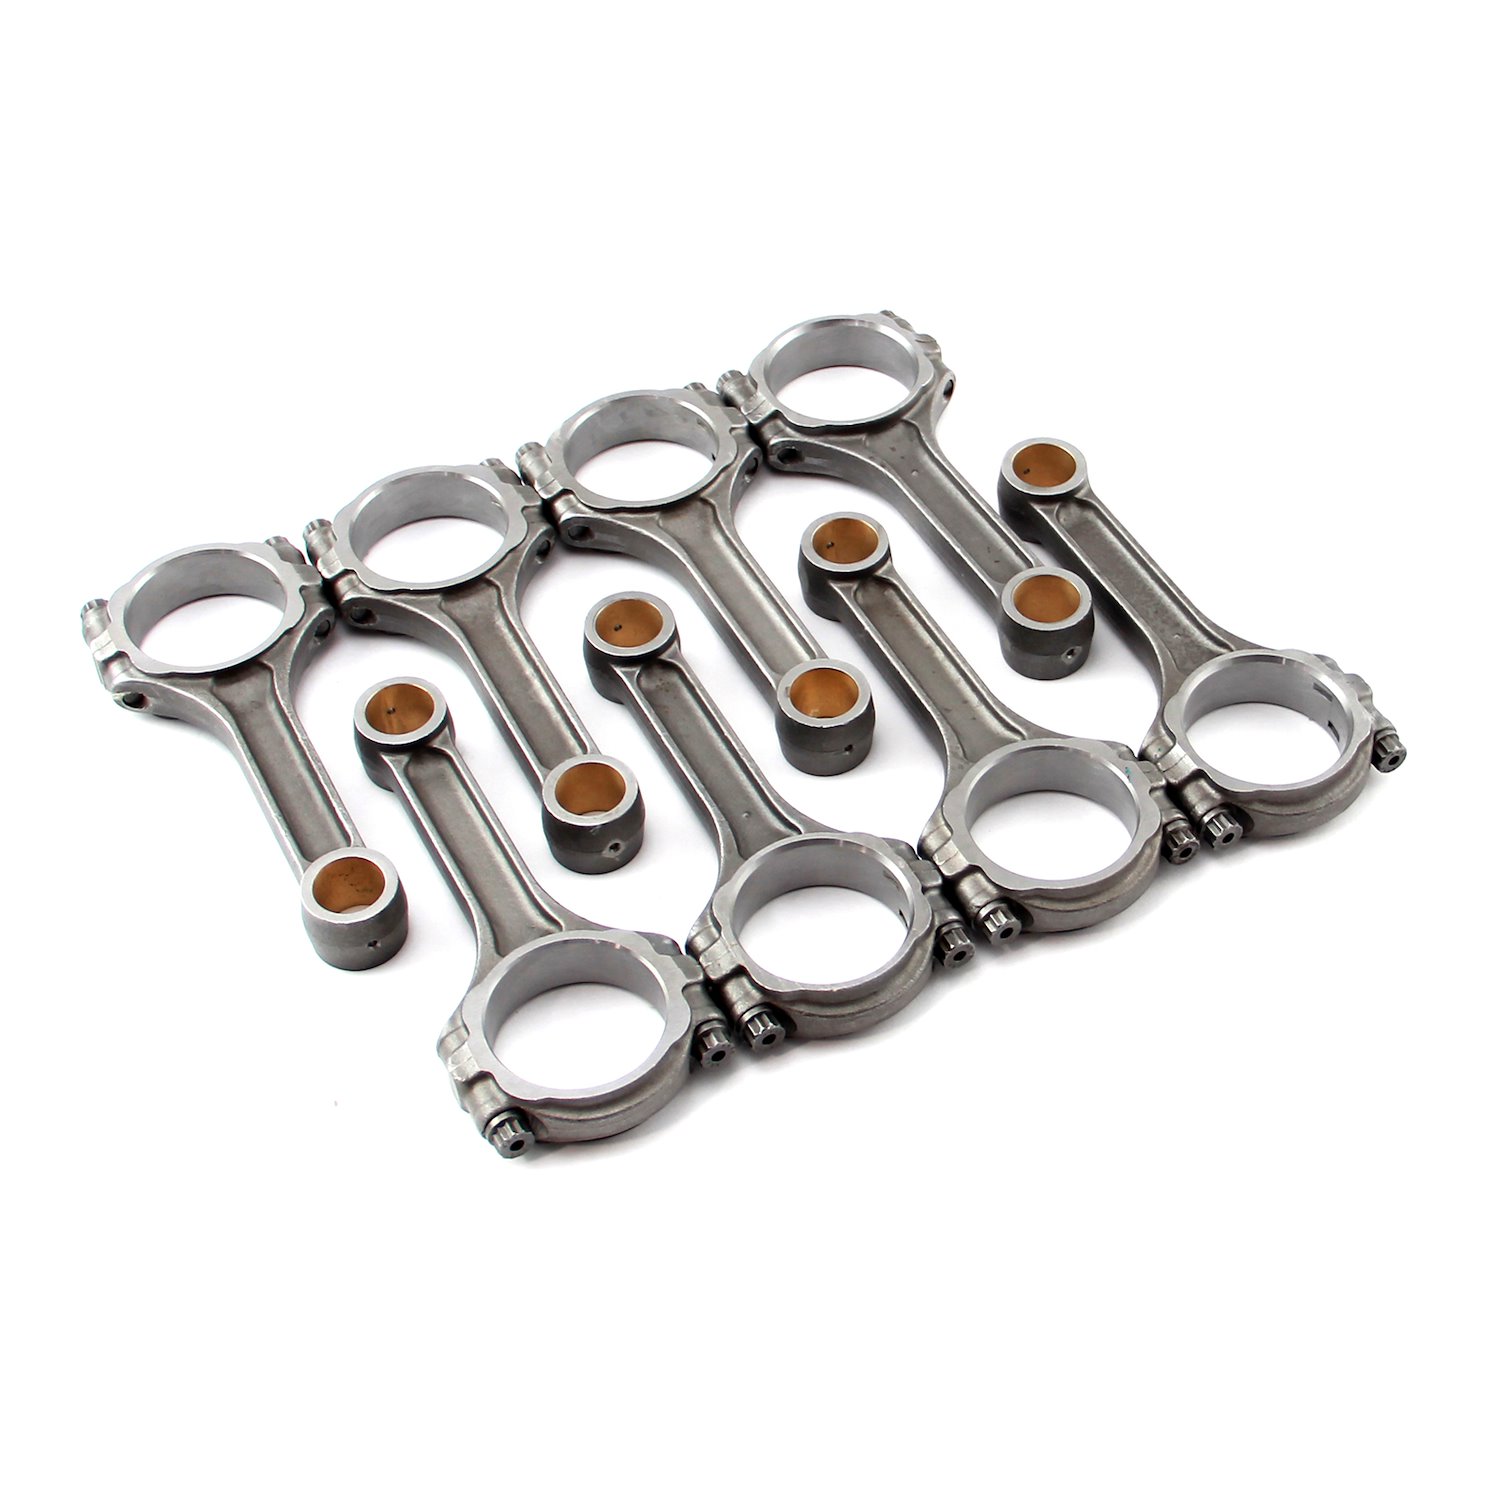 I-Beam Connecting Rods for Small Block Chevy 350